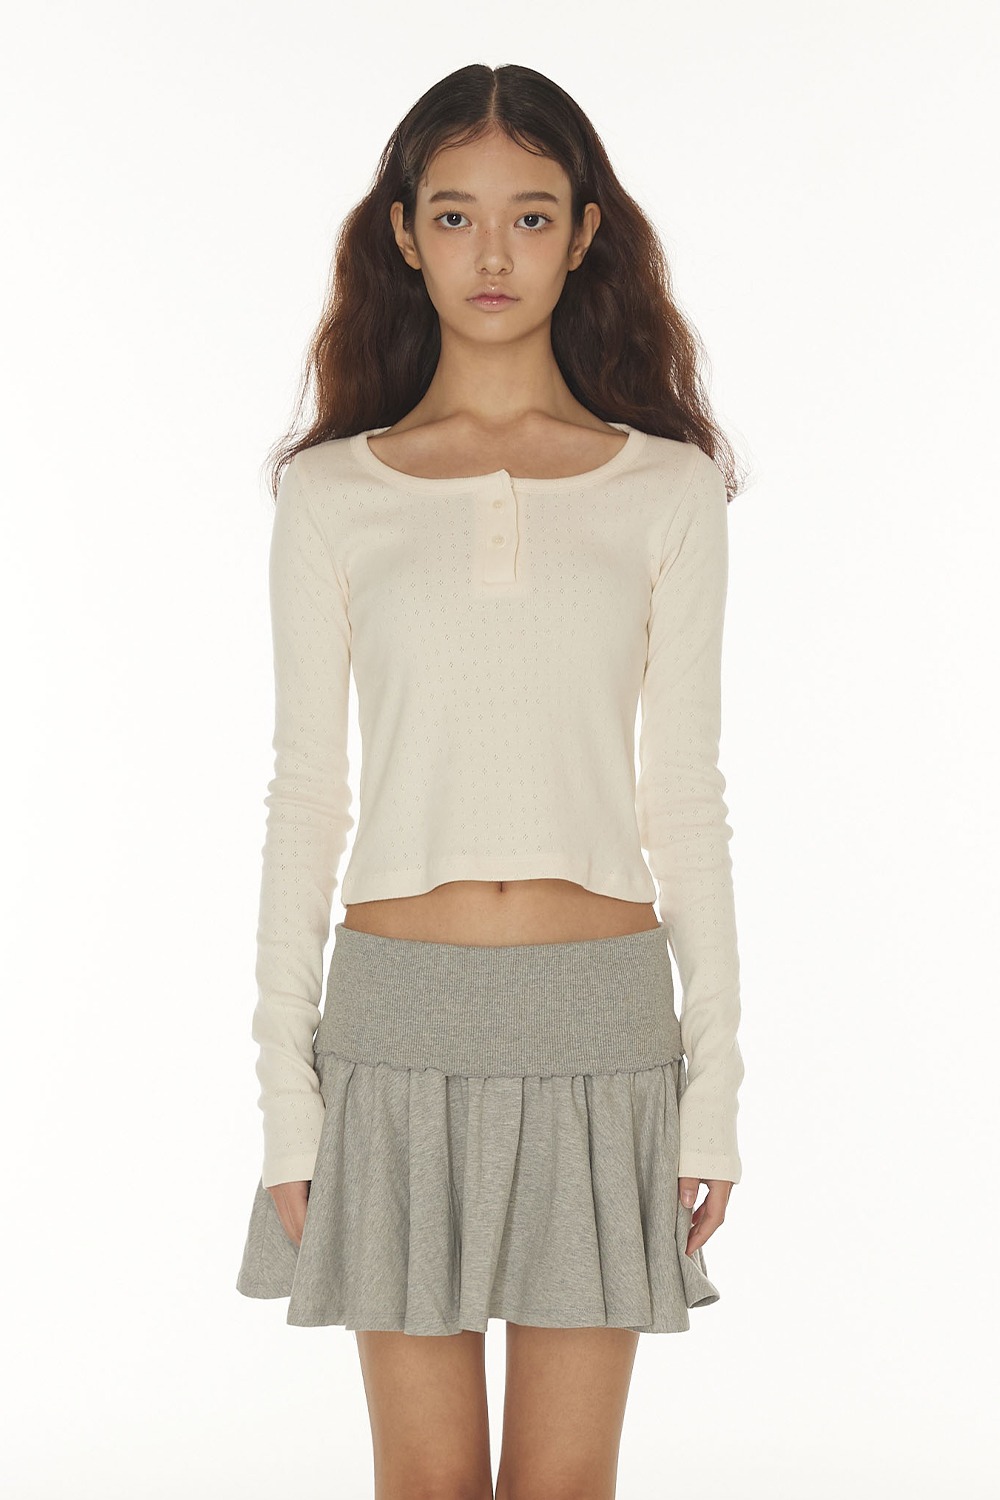 BUTTON SQUARE NECK T - IVORY